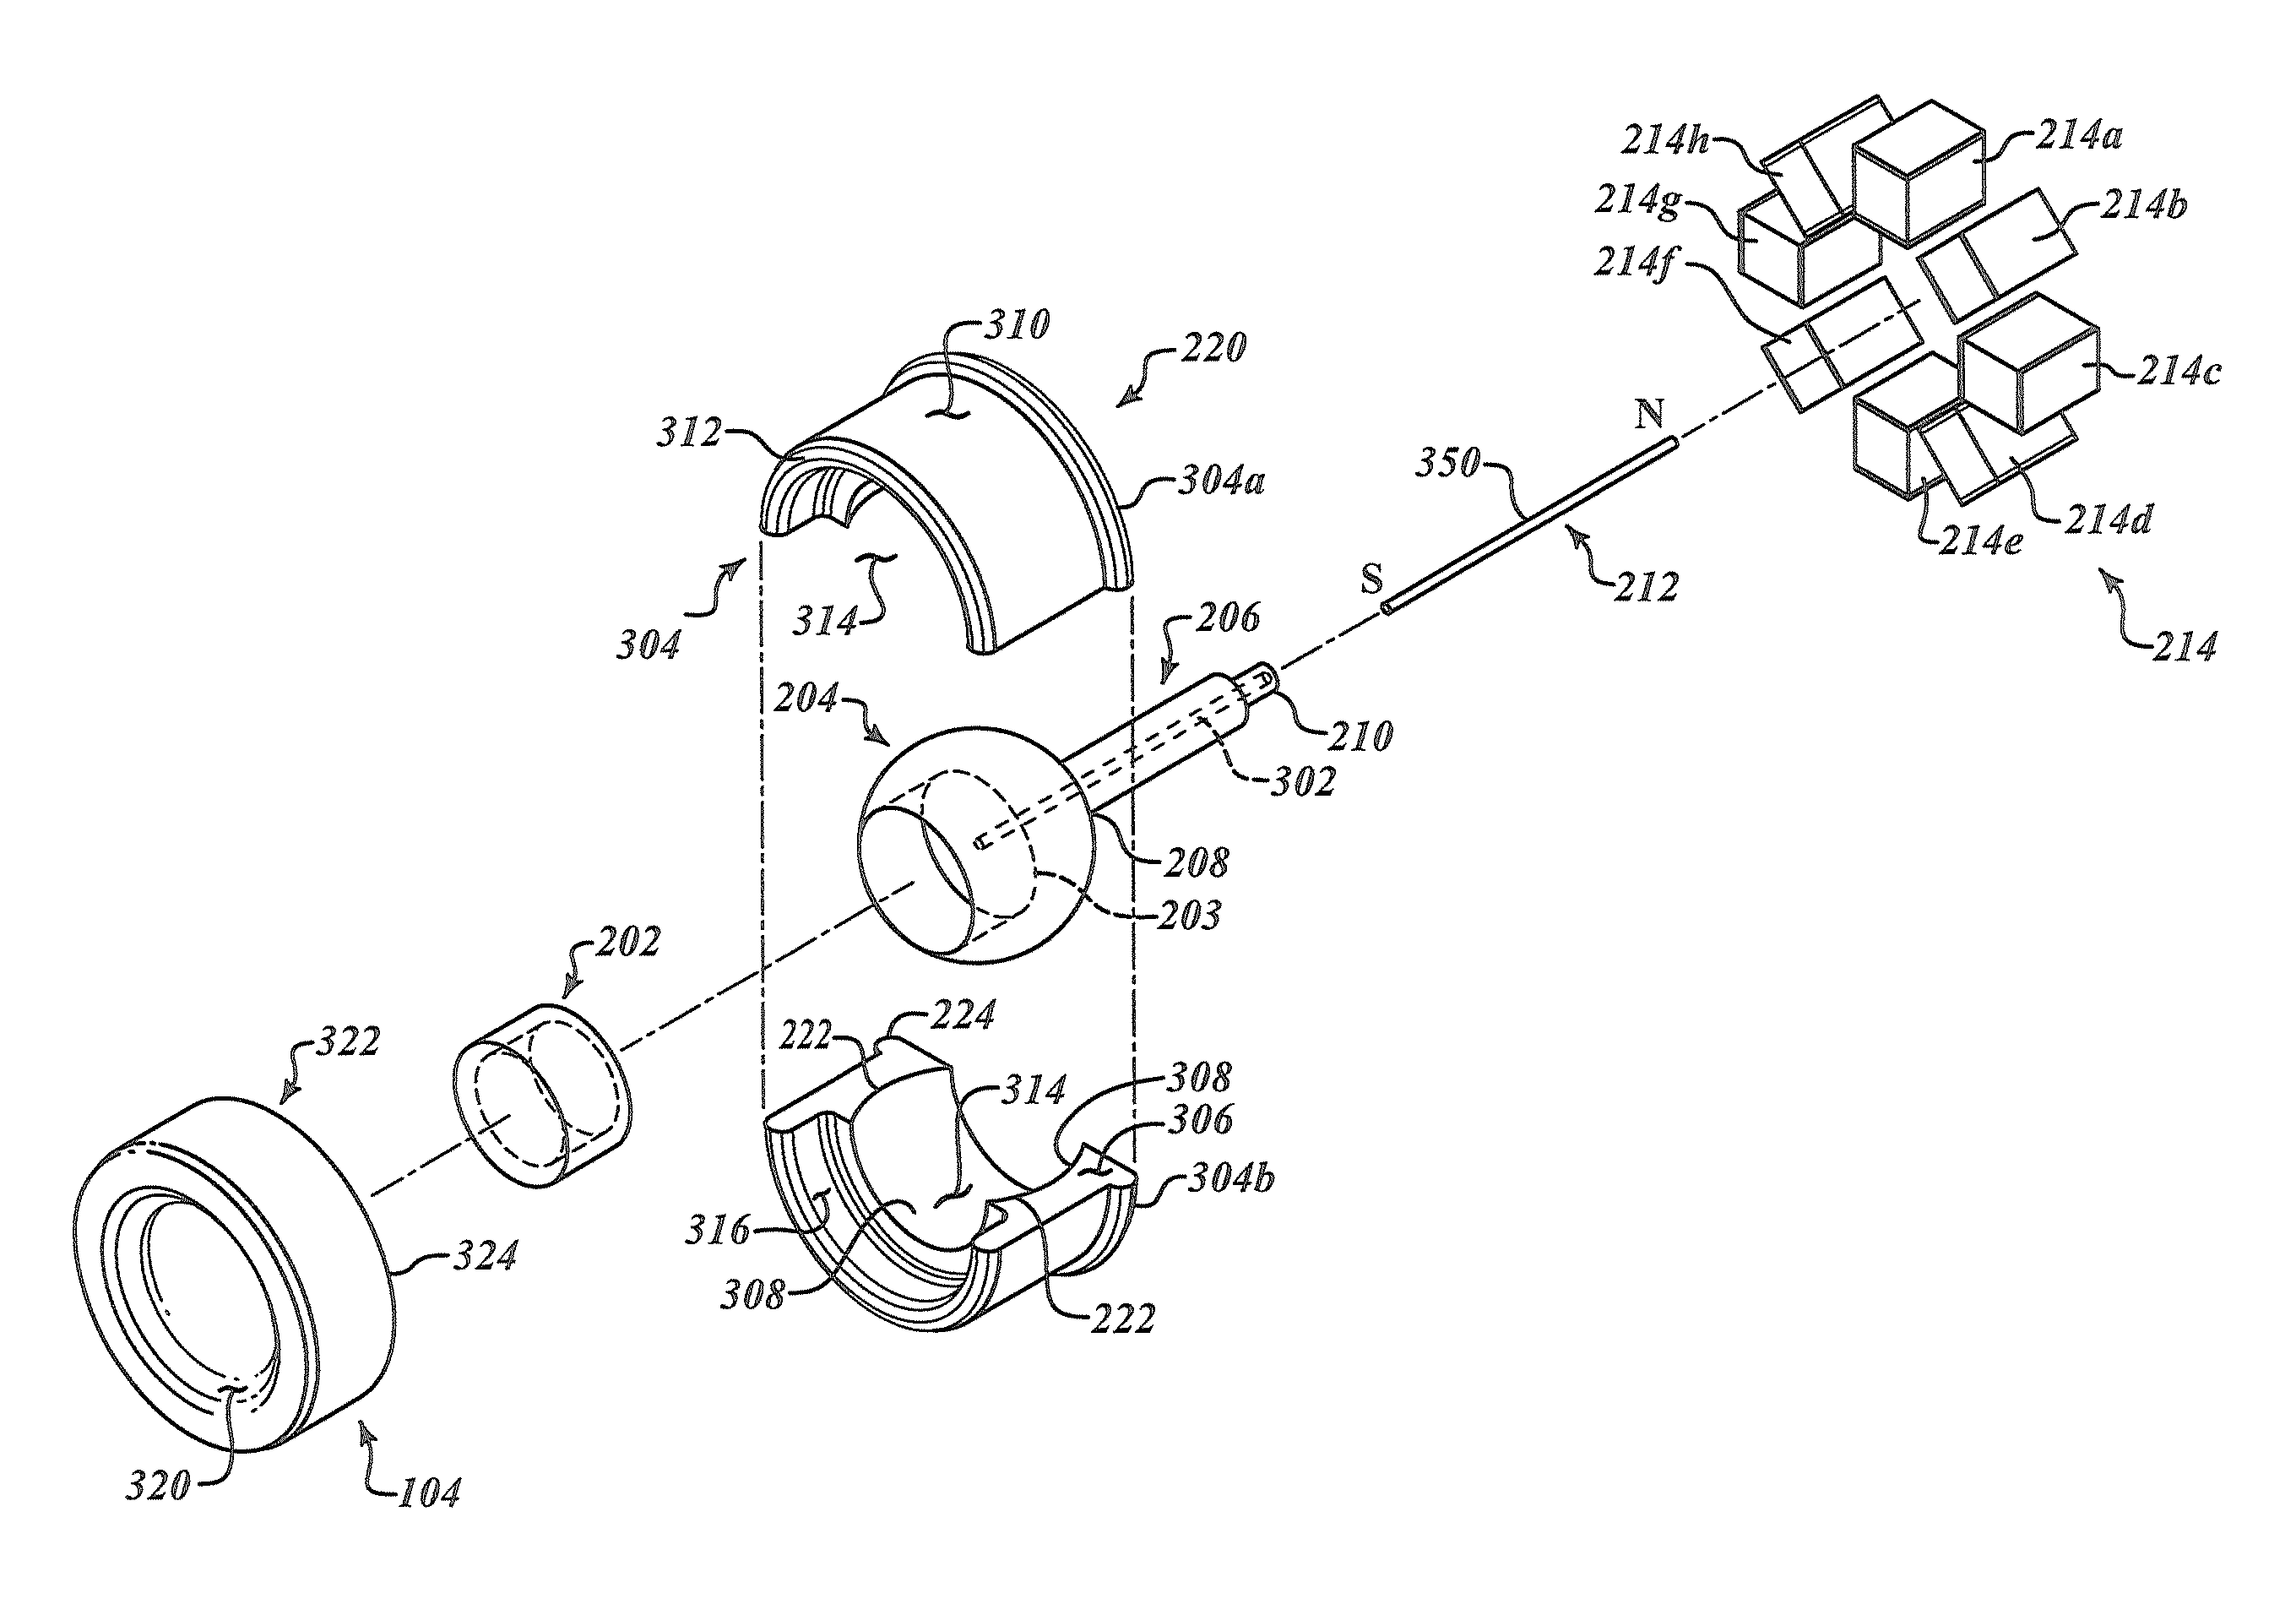 Ocular ultrasound based assessment device and related methods